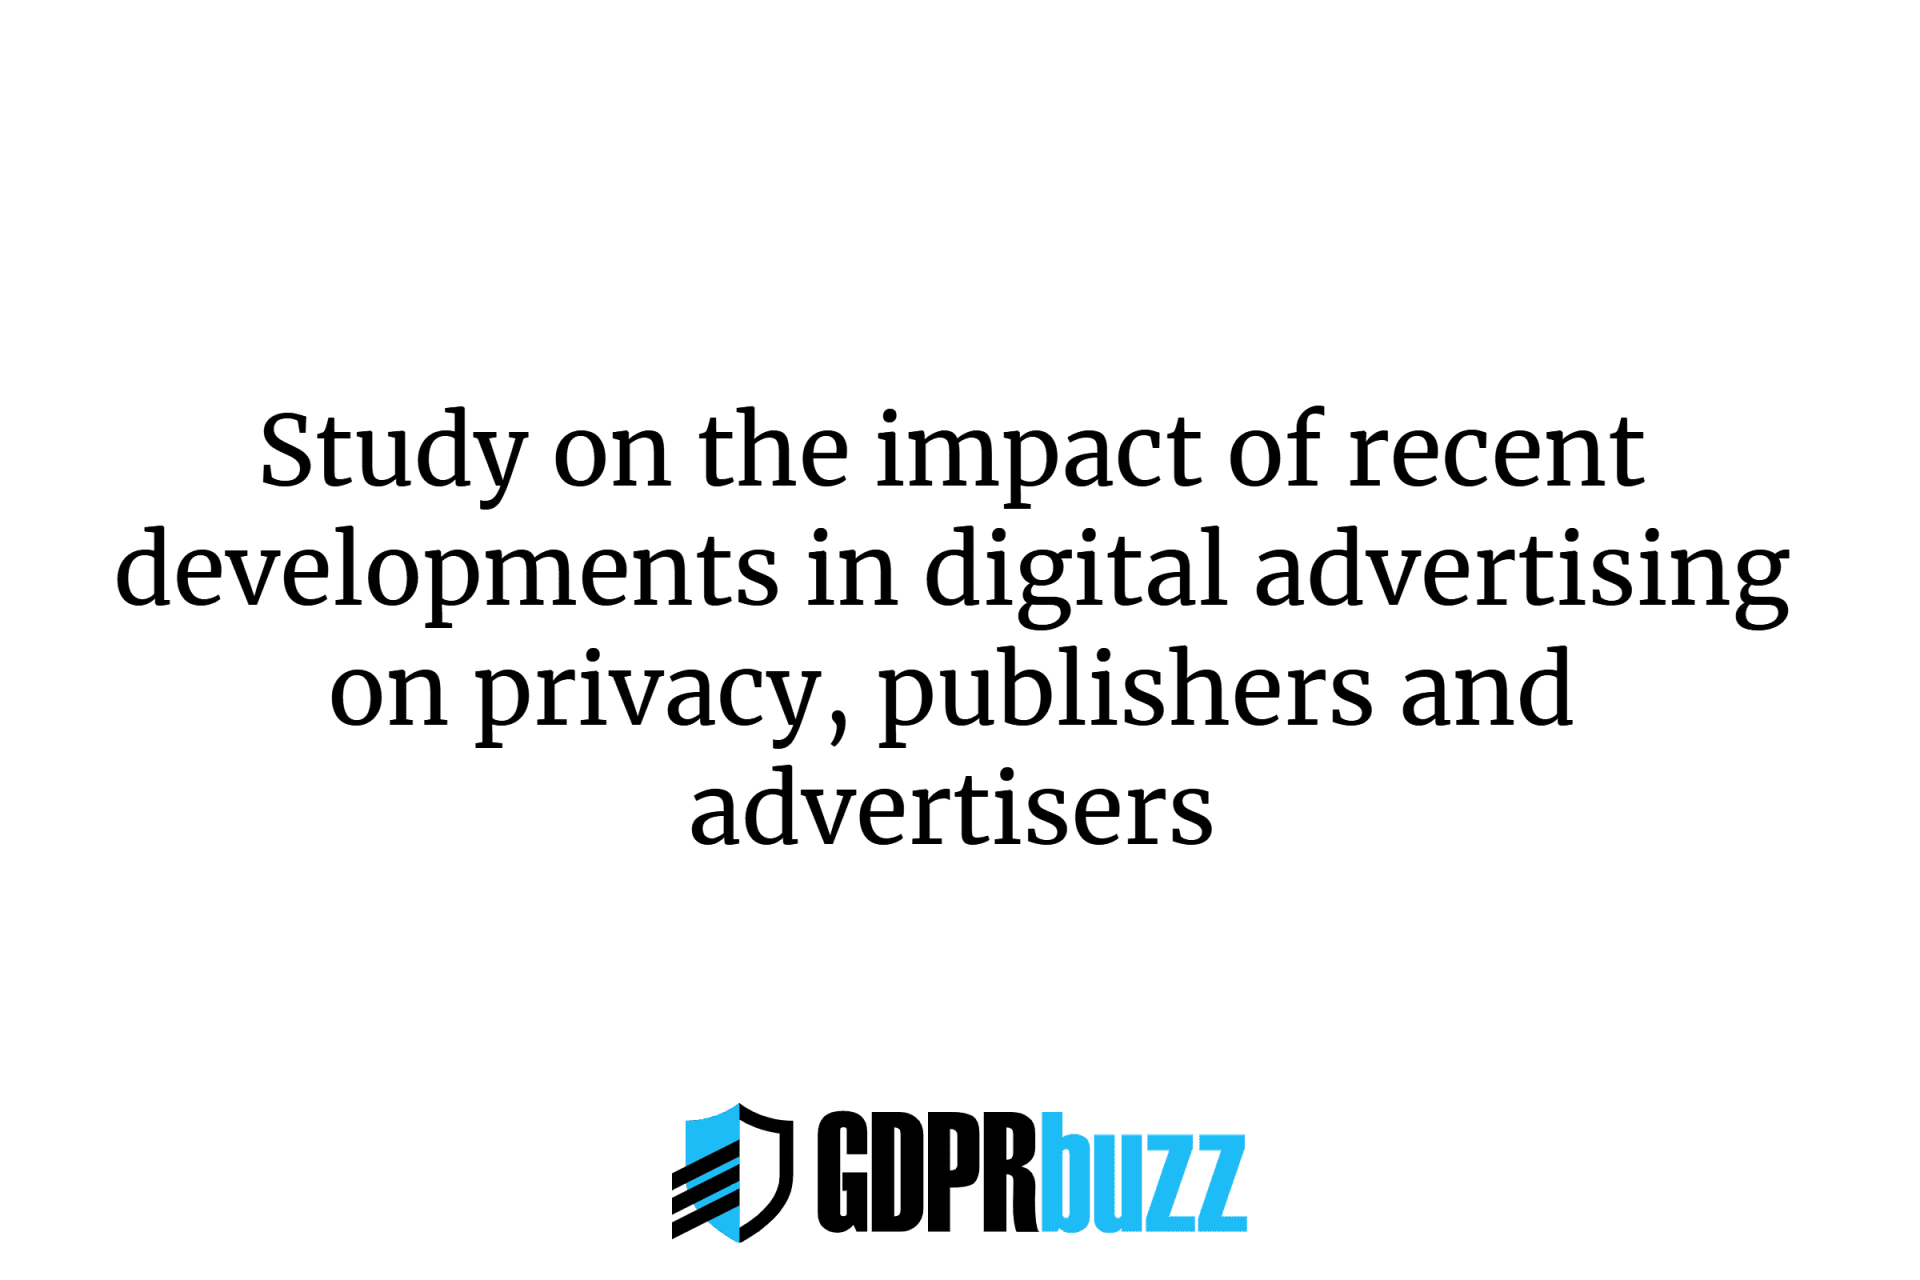 Study on the impact of recent developments in digital advertising on privacy, publishers and advertisers